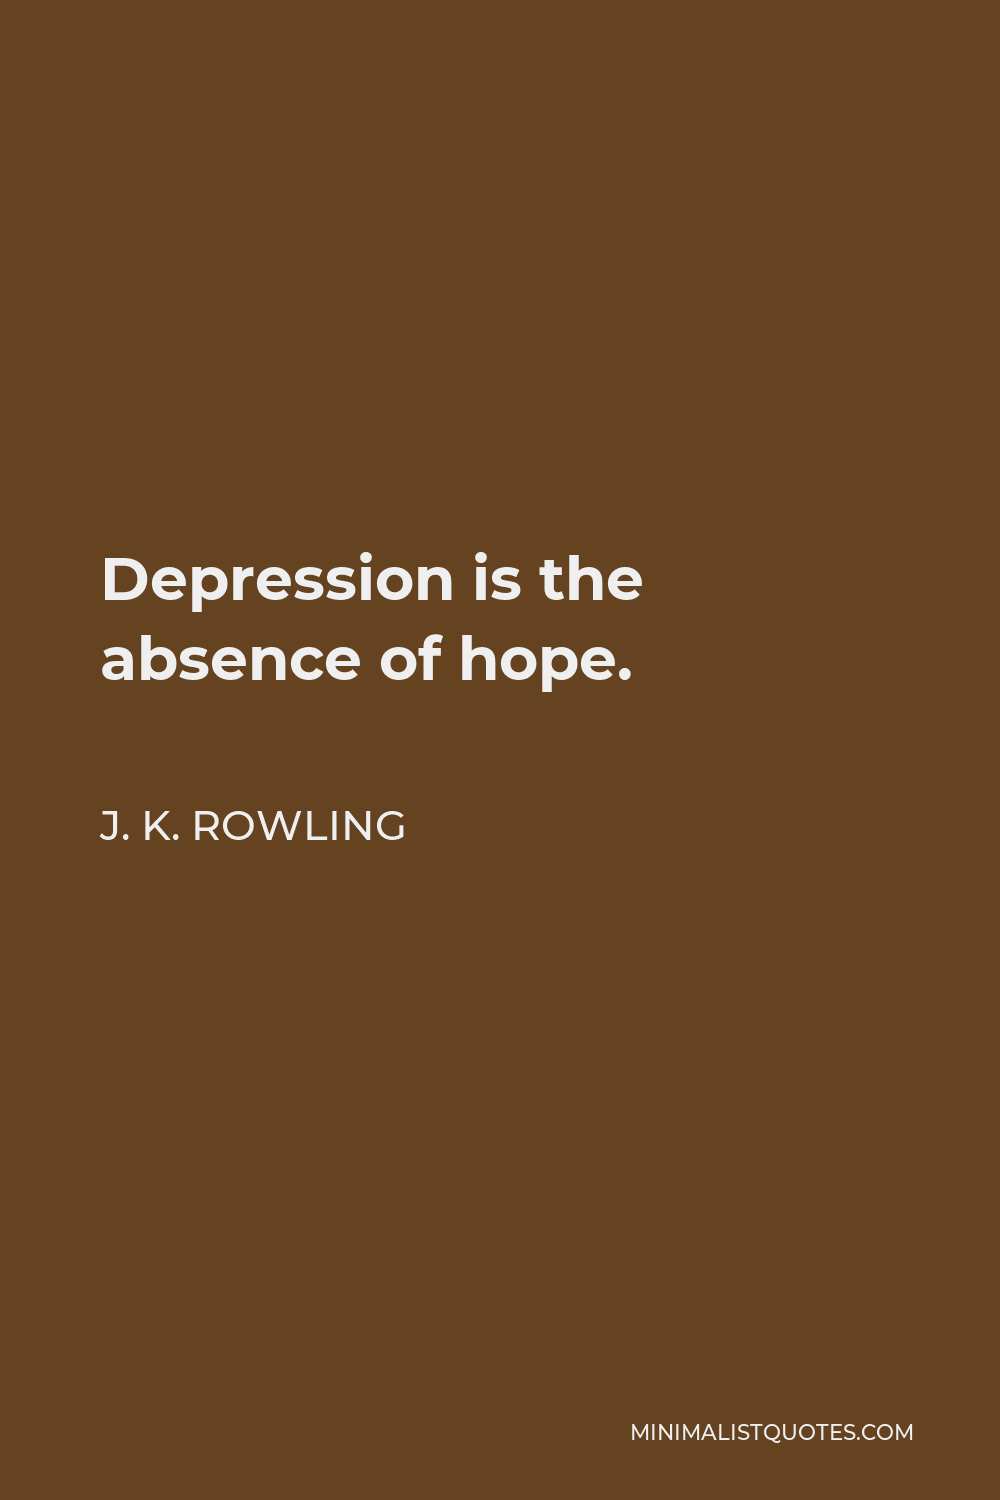 J. K. Rowling Quote - Depression is the absence of hope.